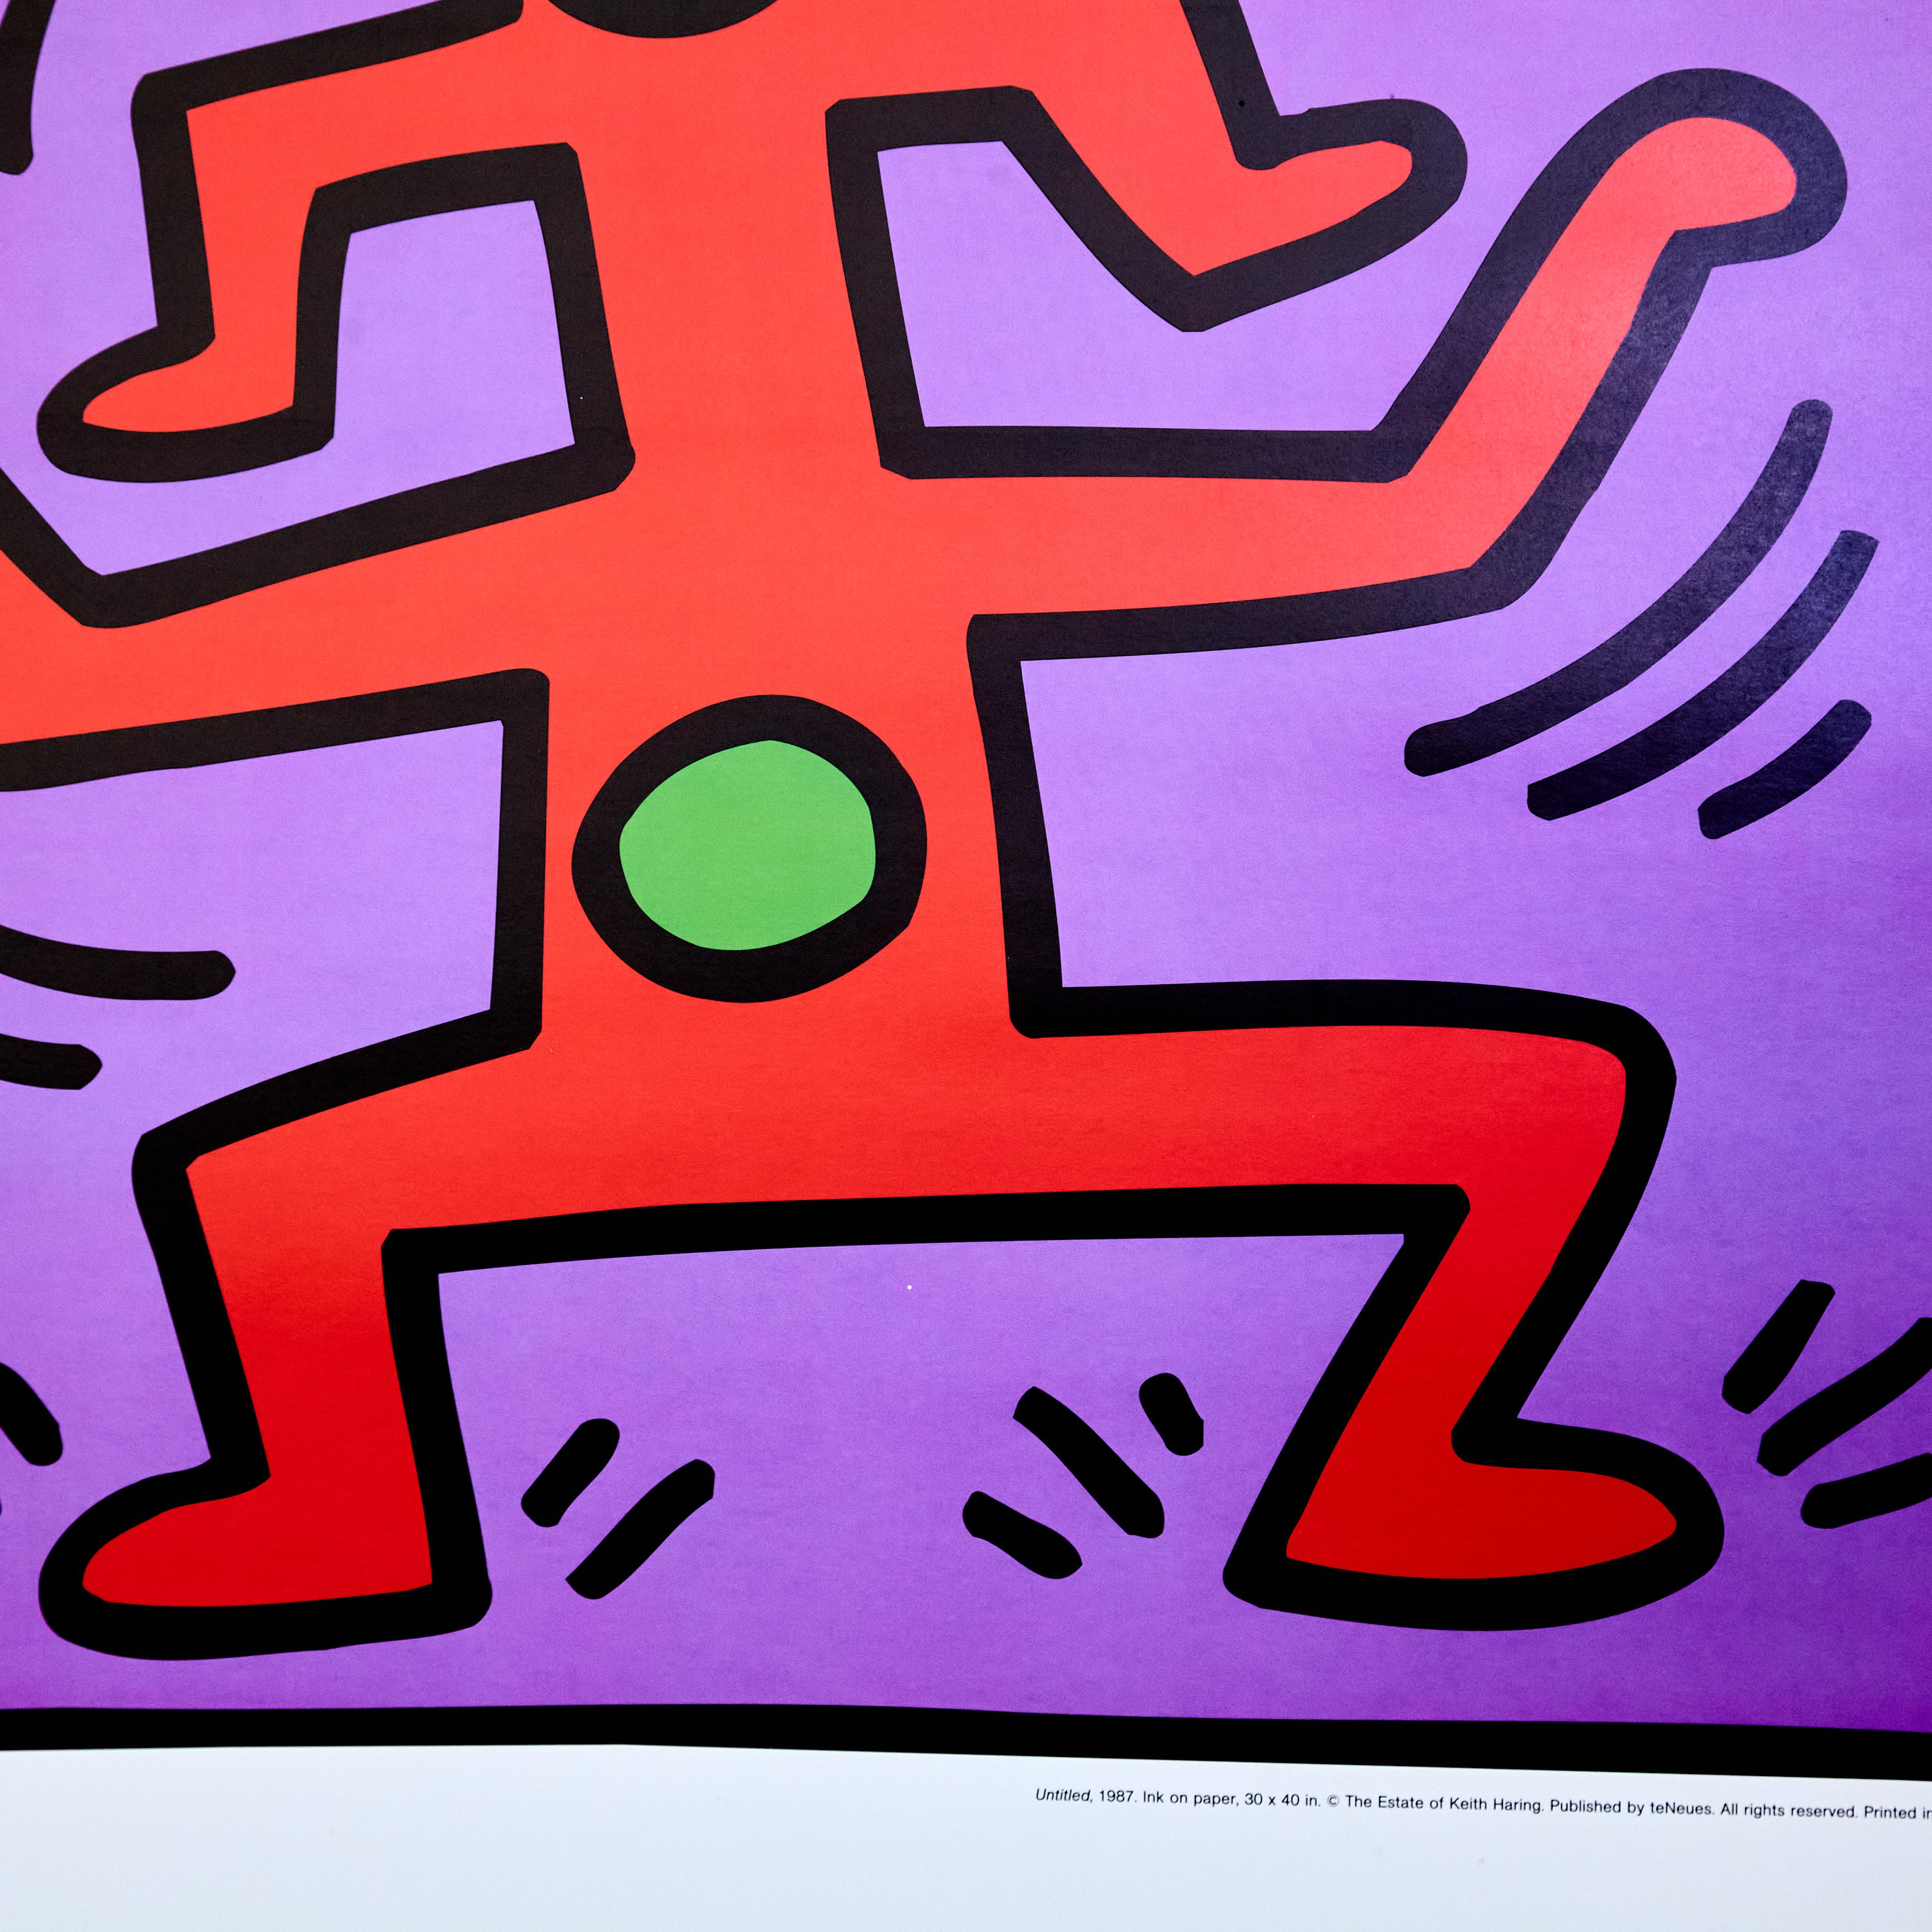 Print litography by Keith Haring made in 1987 by teNeues.

Manufactured in Germany, circa 1980.

In original condition with minor wear consistent of age and use, preserving a beautiful patina.

Materials: 
Paper

Dimensions: 
D 0.1 cm x W